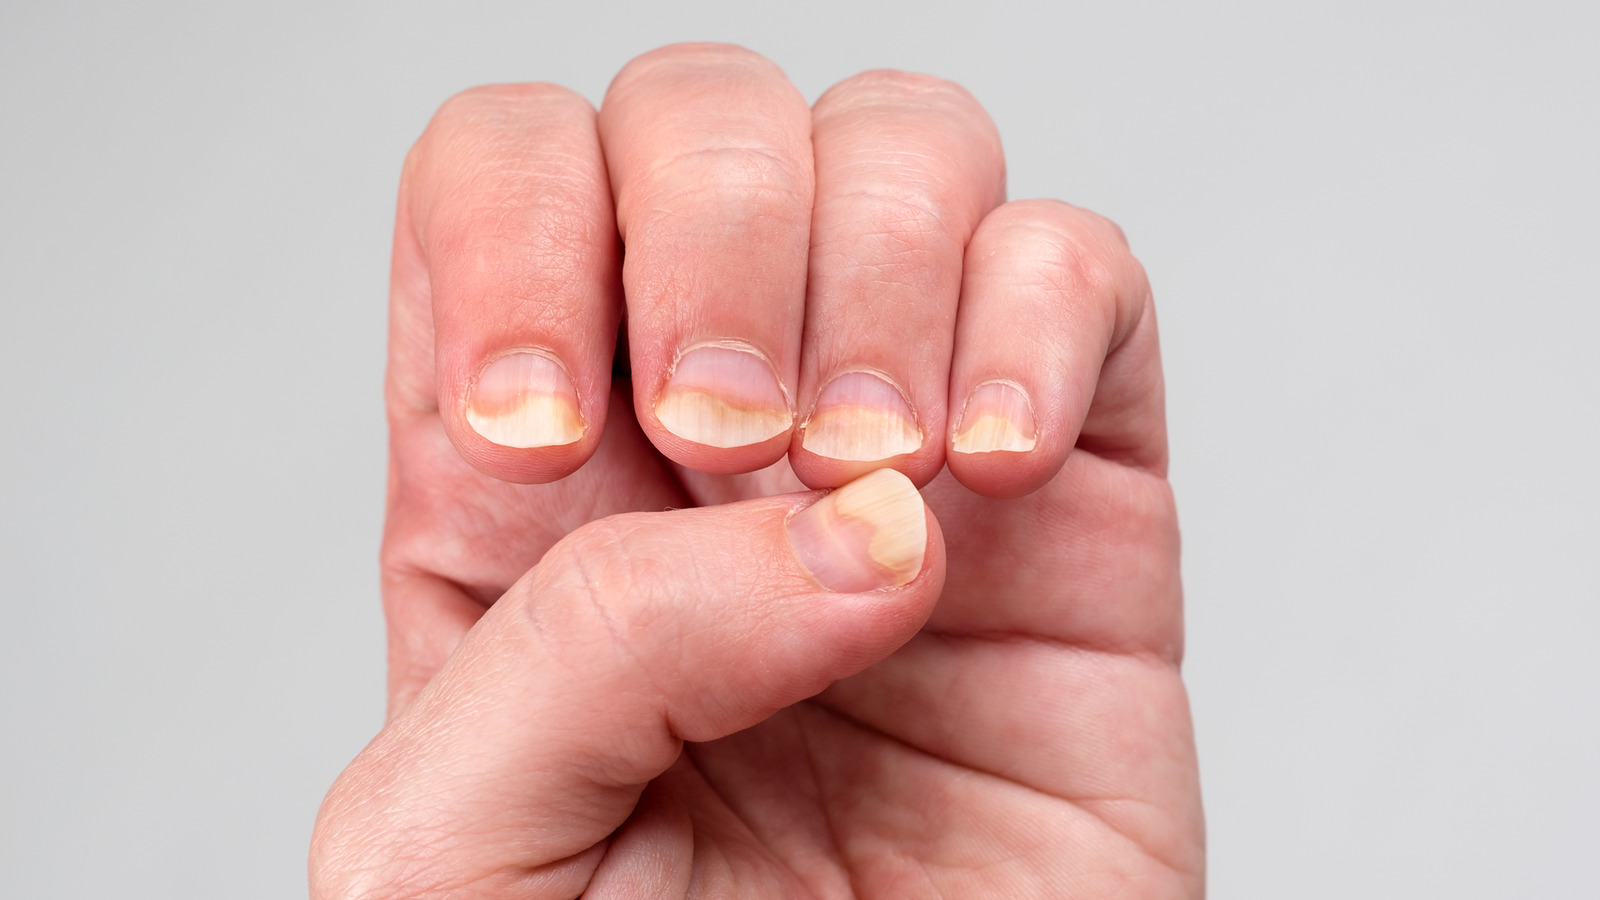 Healthy Nails: Signs to Look For, Dos and Don'ts, More